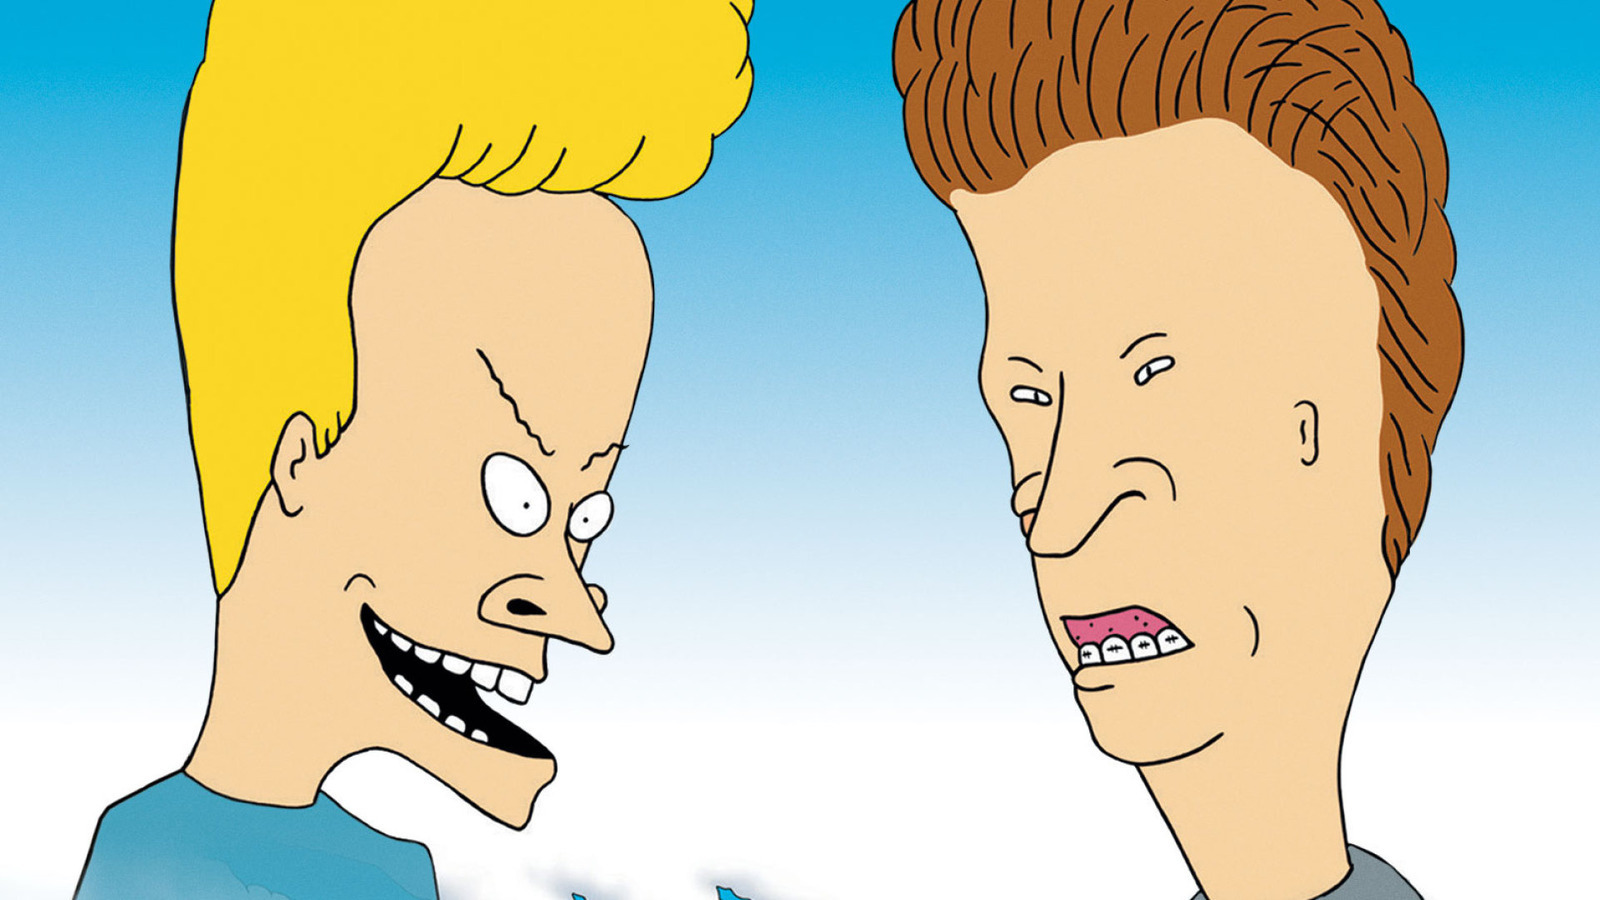 Mike Judge still sees Beavis and Butt-Head as the magnum opus of his career